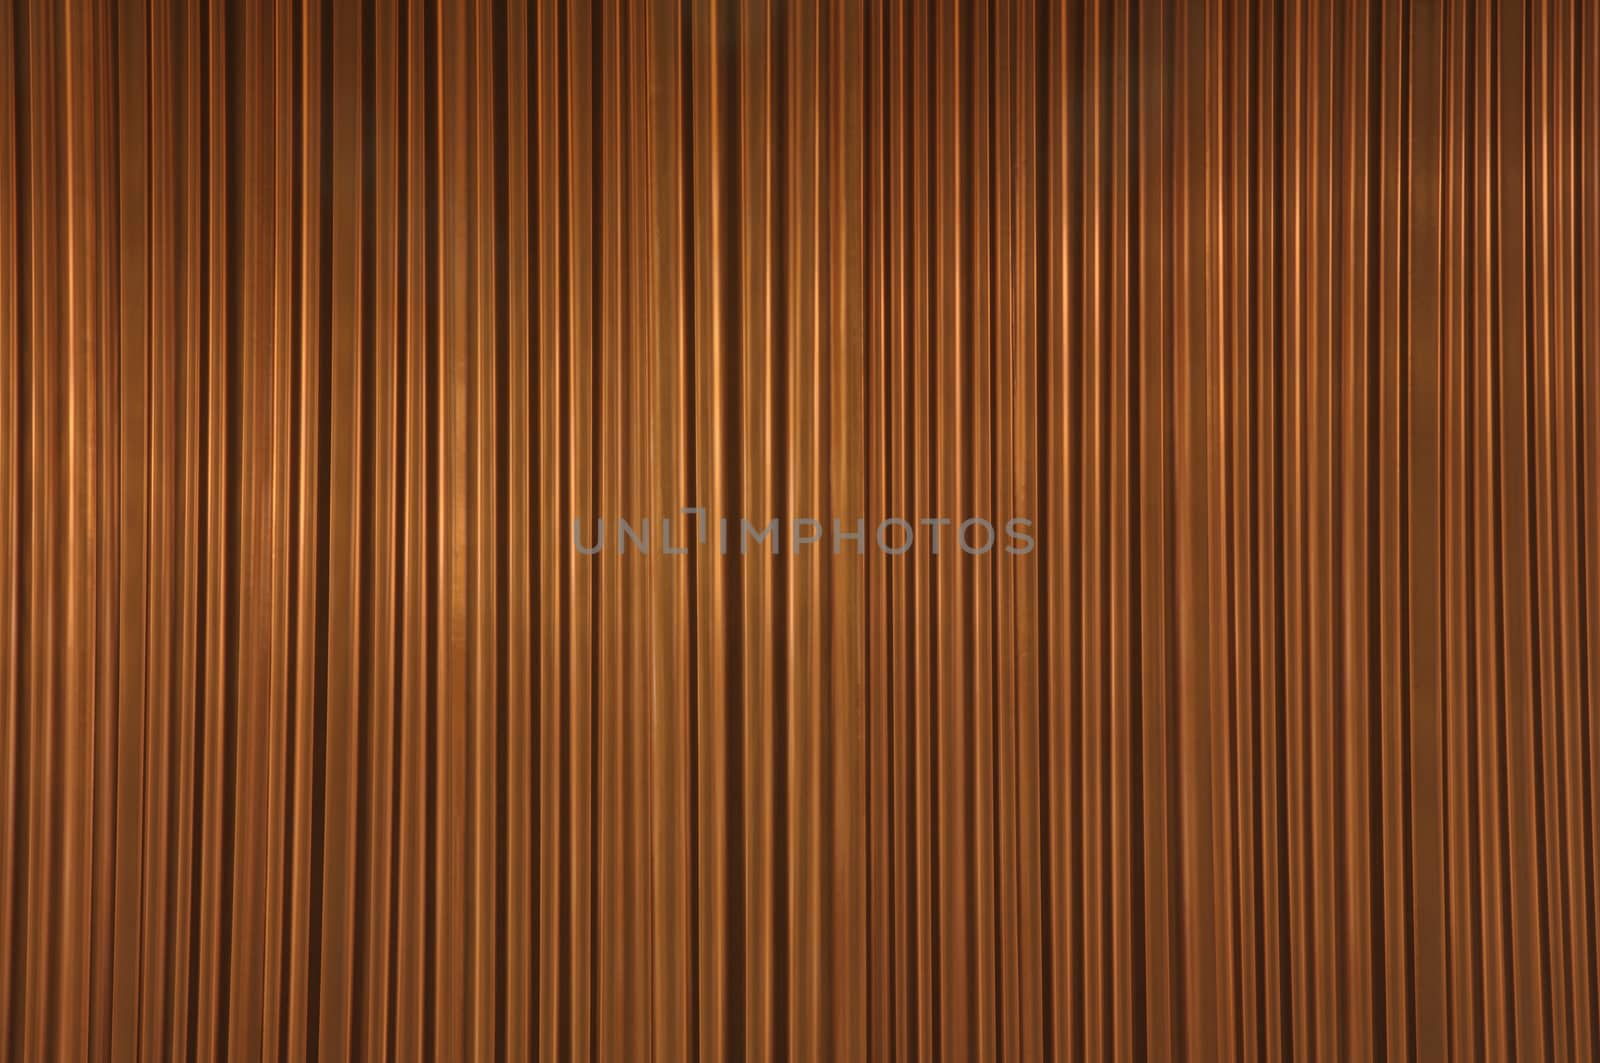 Bronze curtain background with vertical lines